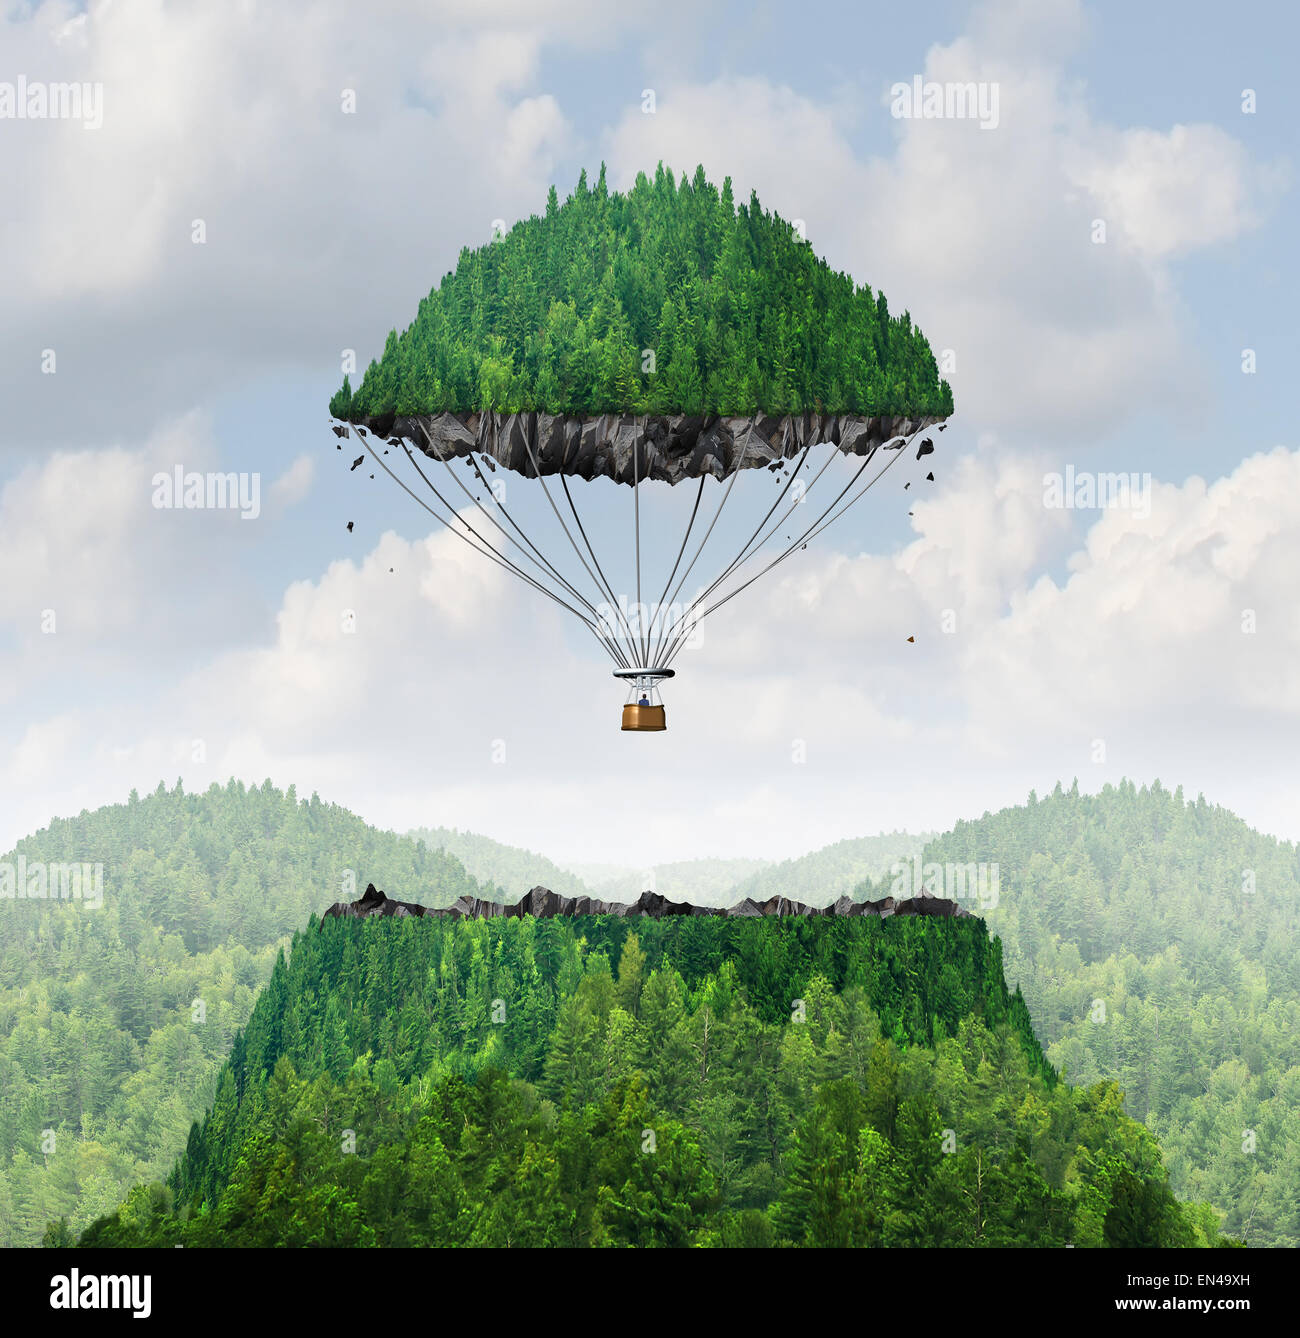 Imagination concept as a person lifting off with a detached top of a mountain floating up to the sky as a hot air balloon as a metaphor for the power of imagining traveling and dreaming of moving mountains. Stock Photo